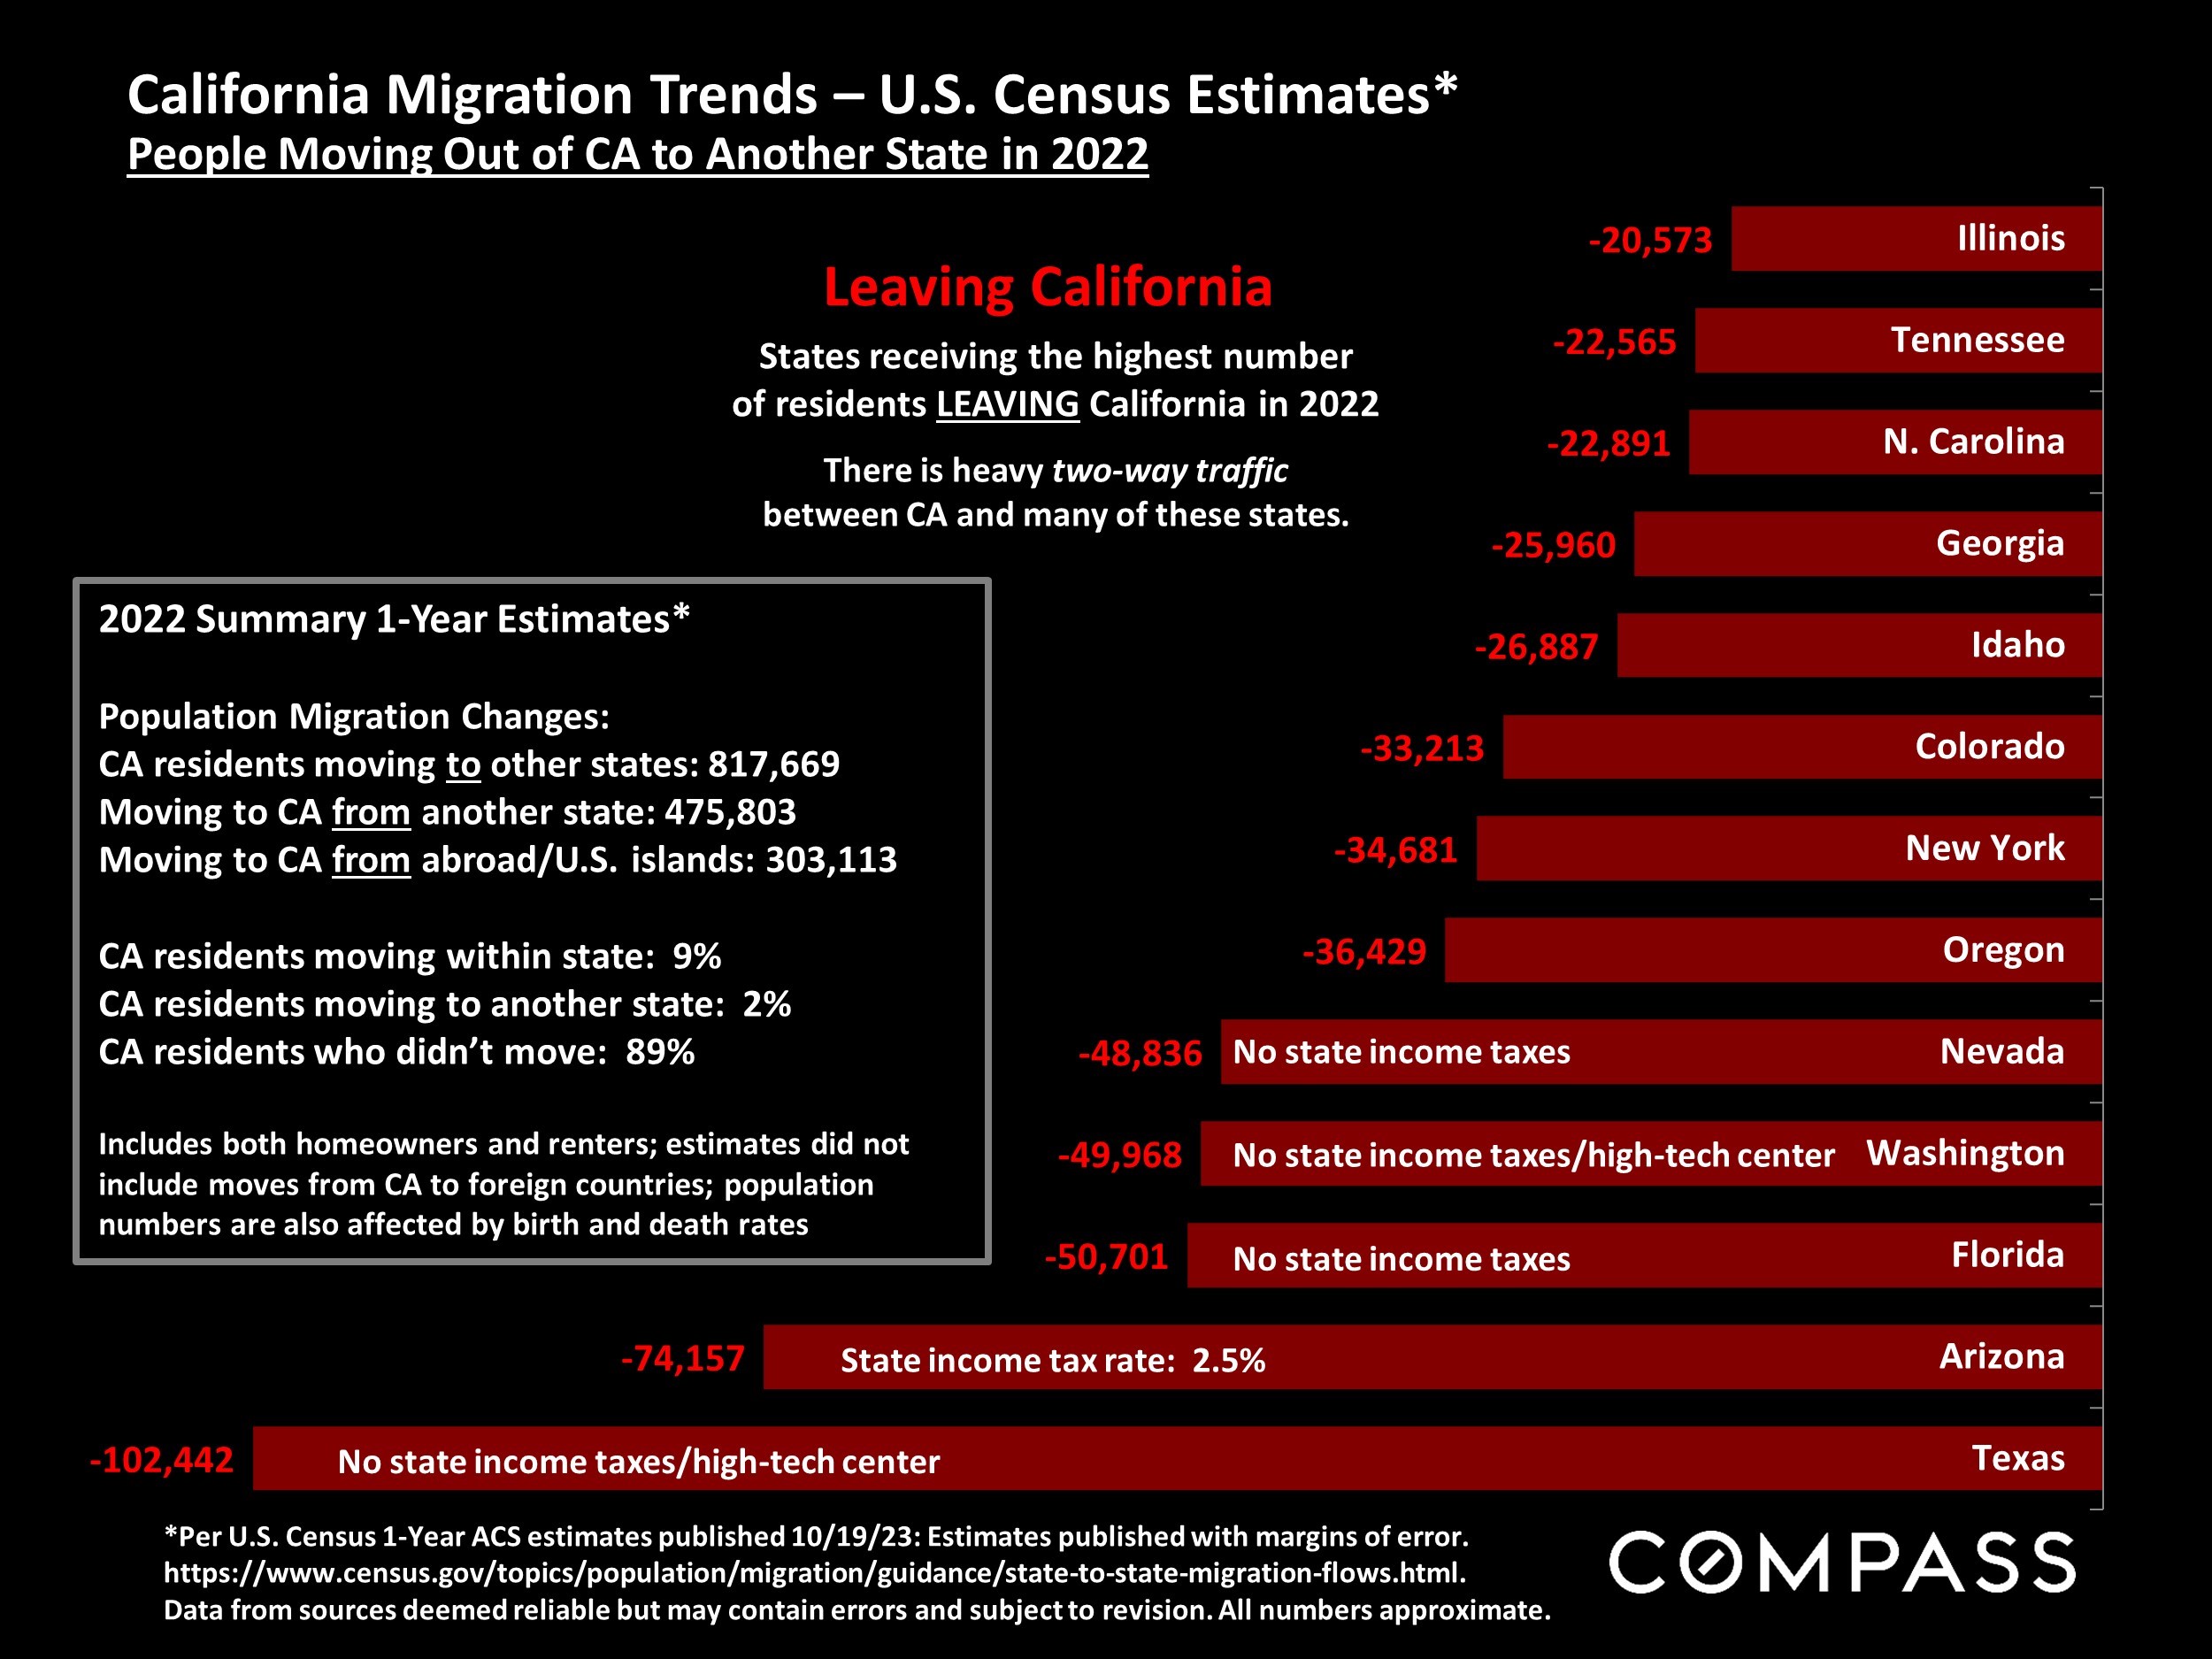 California Migration Trends - U.S. Census Estimates* People Moving Out of CA to Another State in 2022